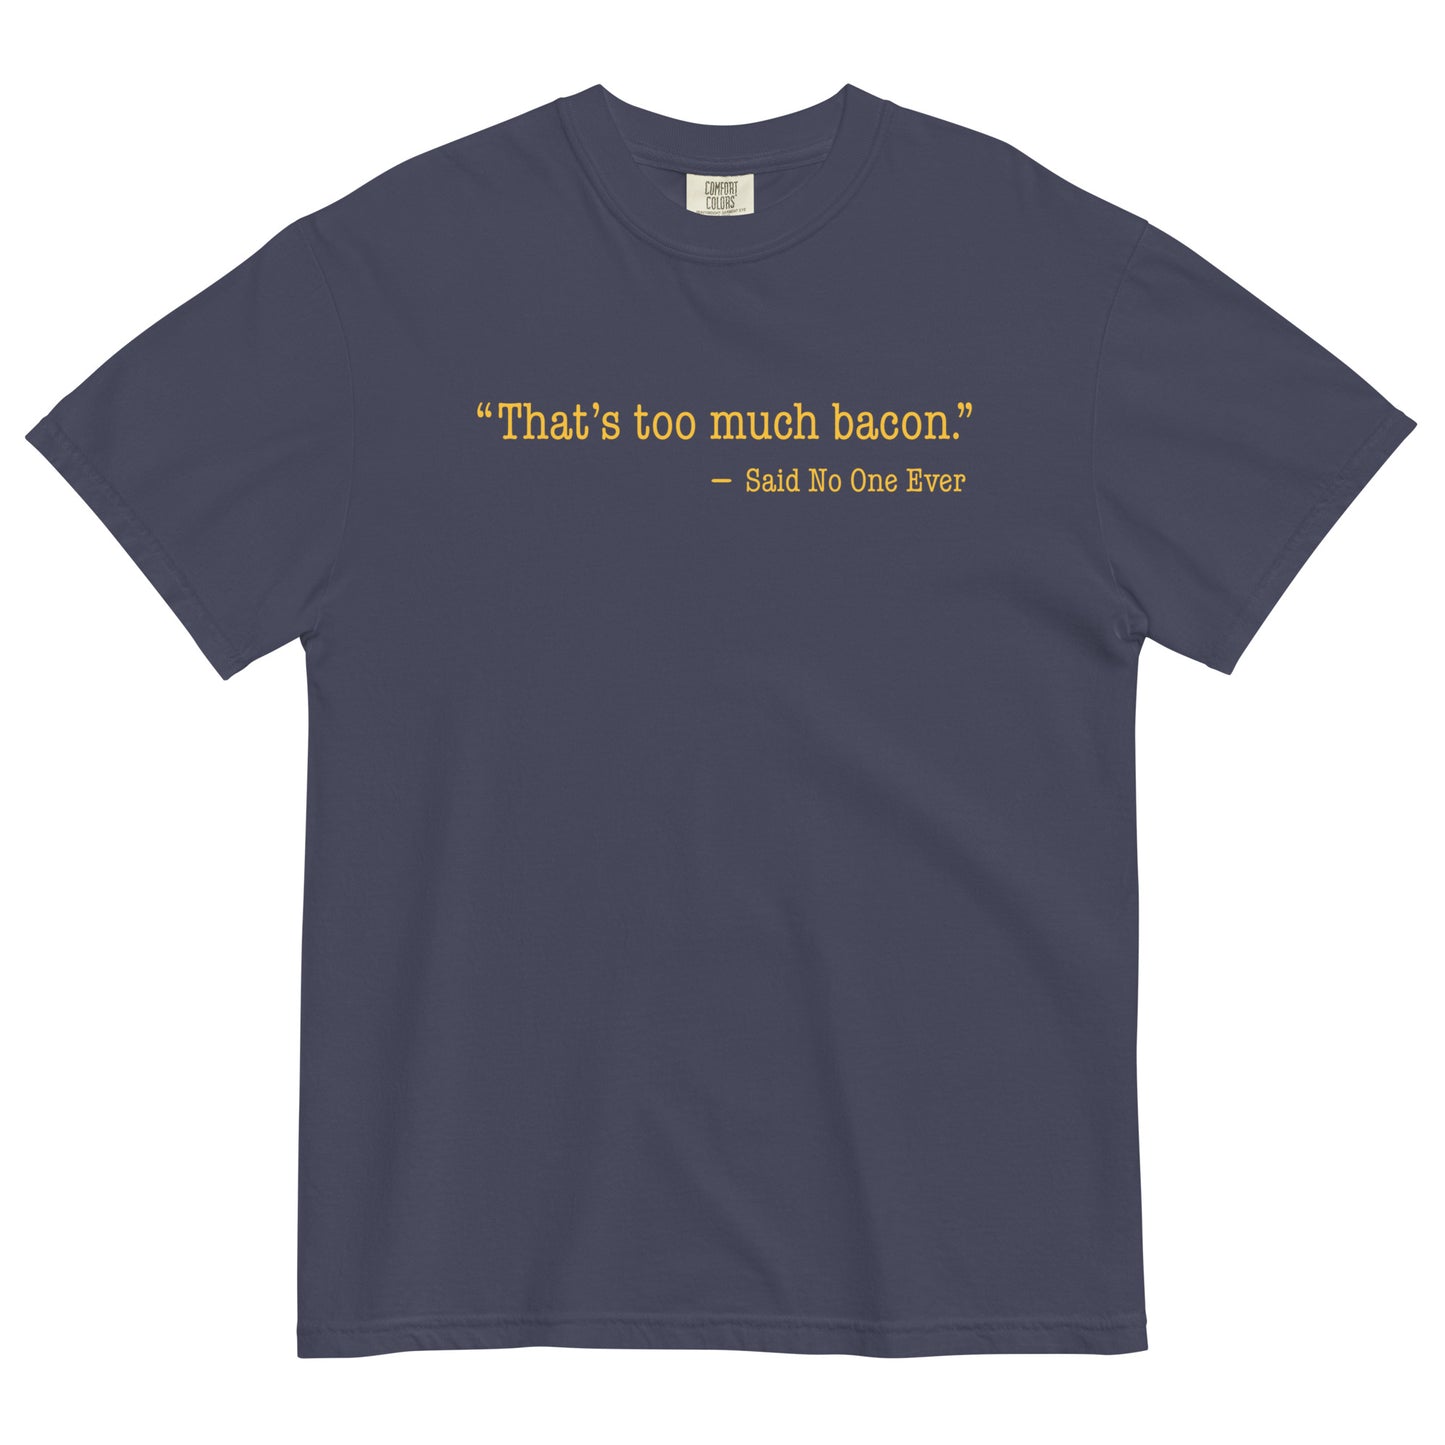 That's Too Much Bacon, Said No One Ever Men's Relaxed Fit Tee